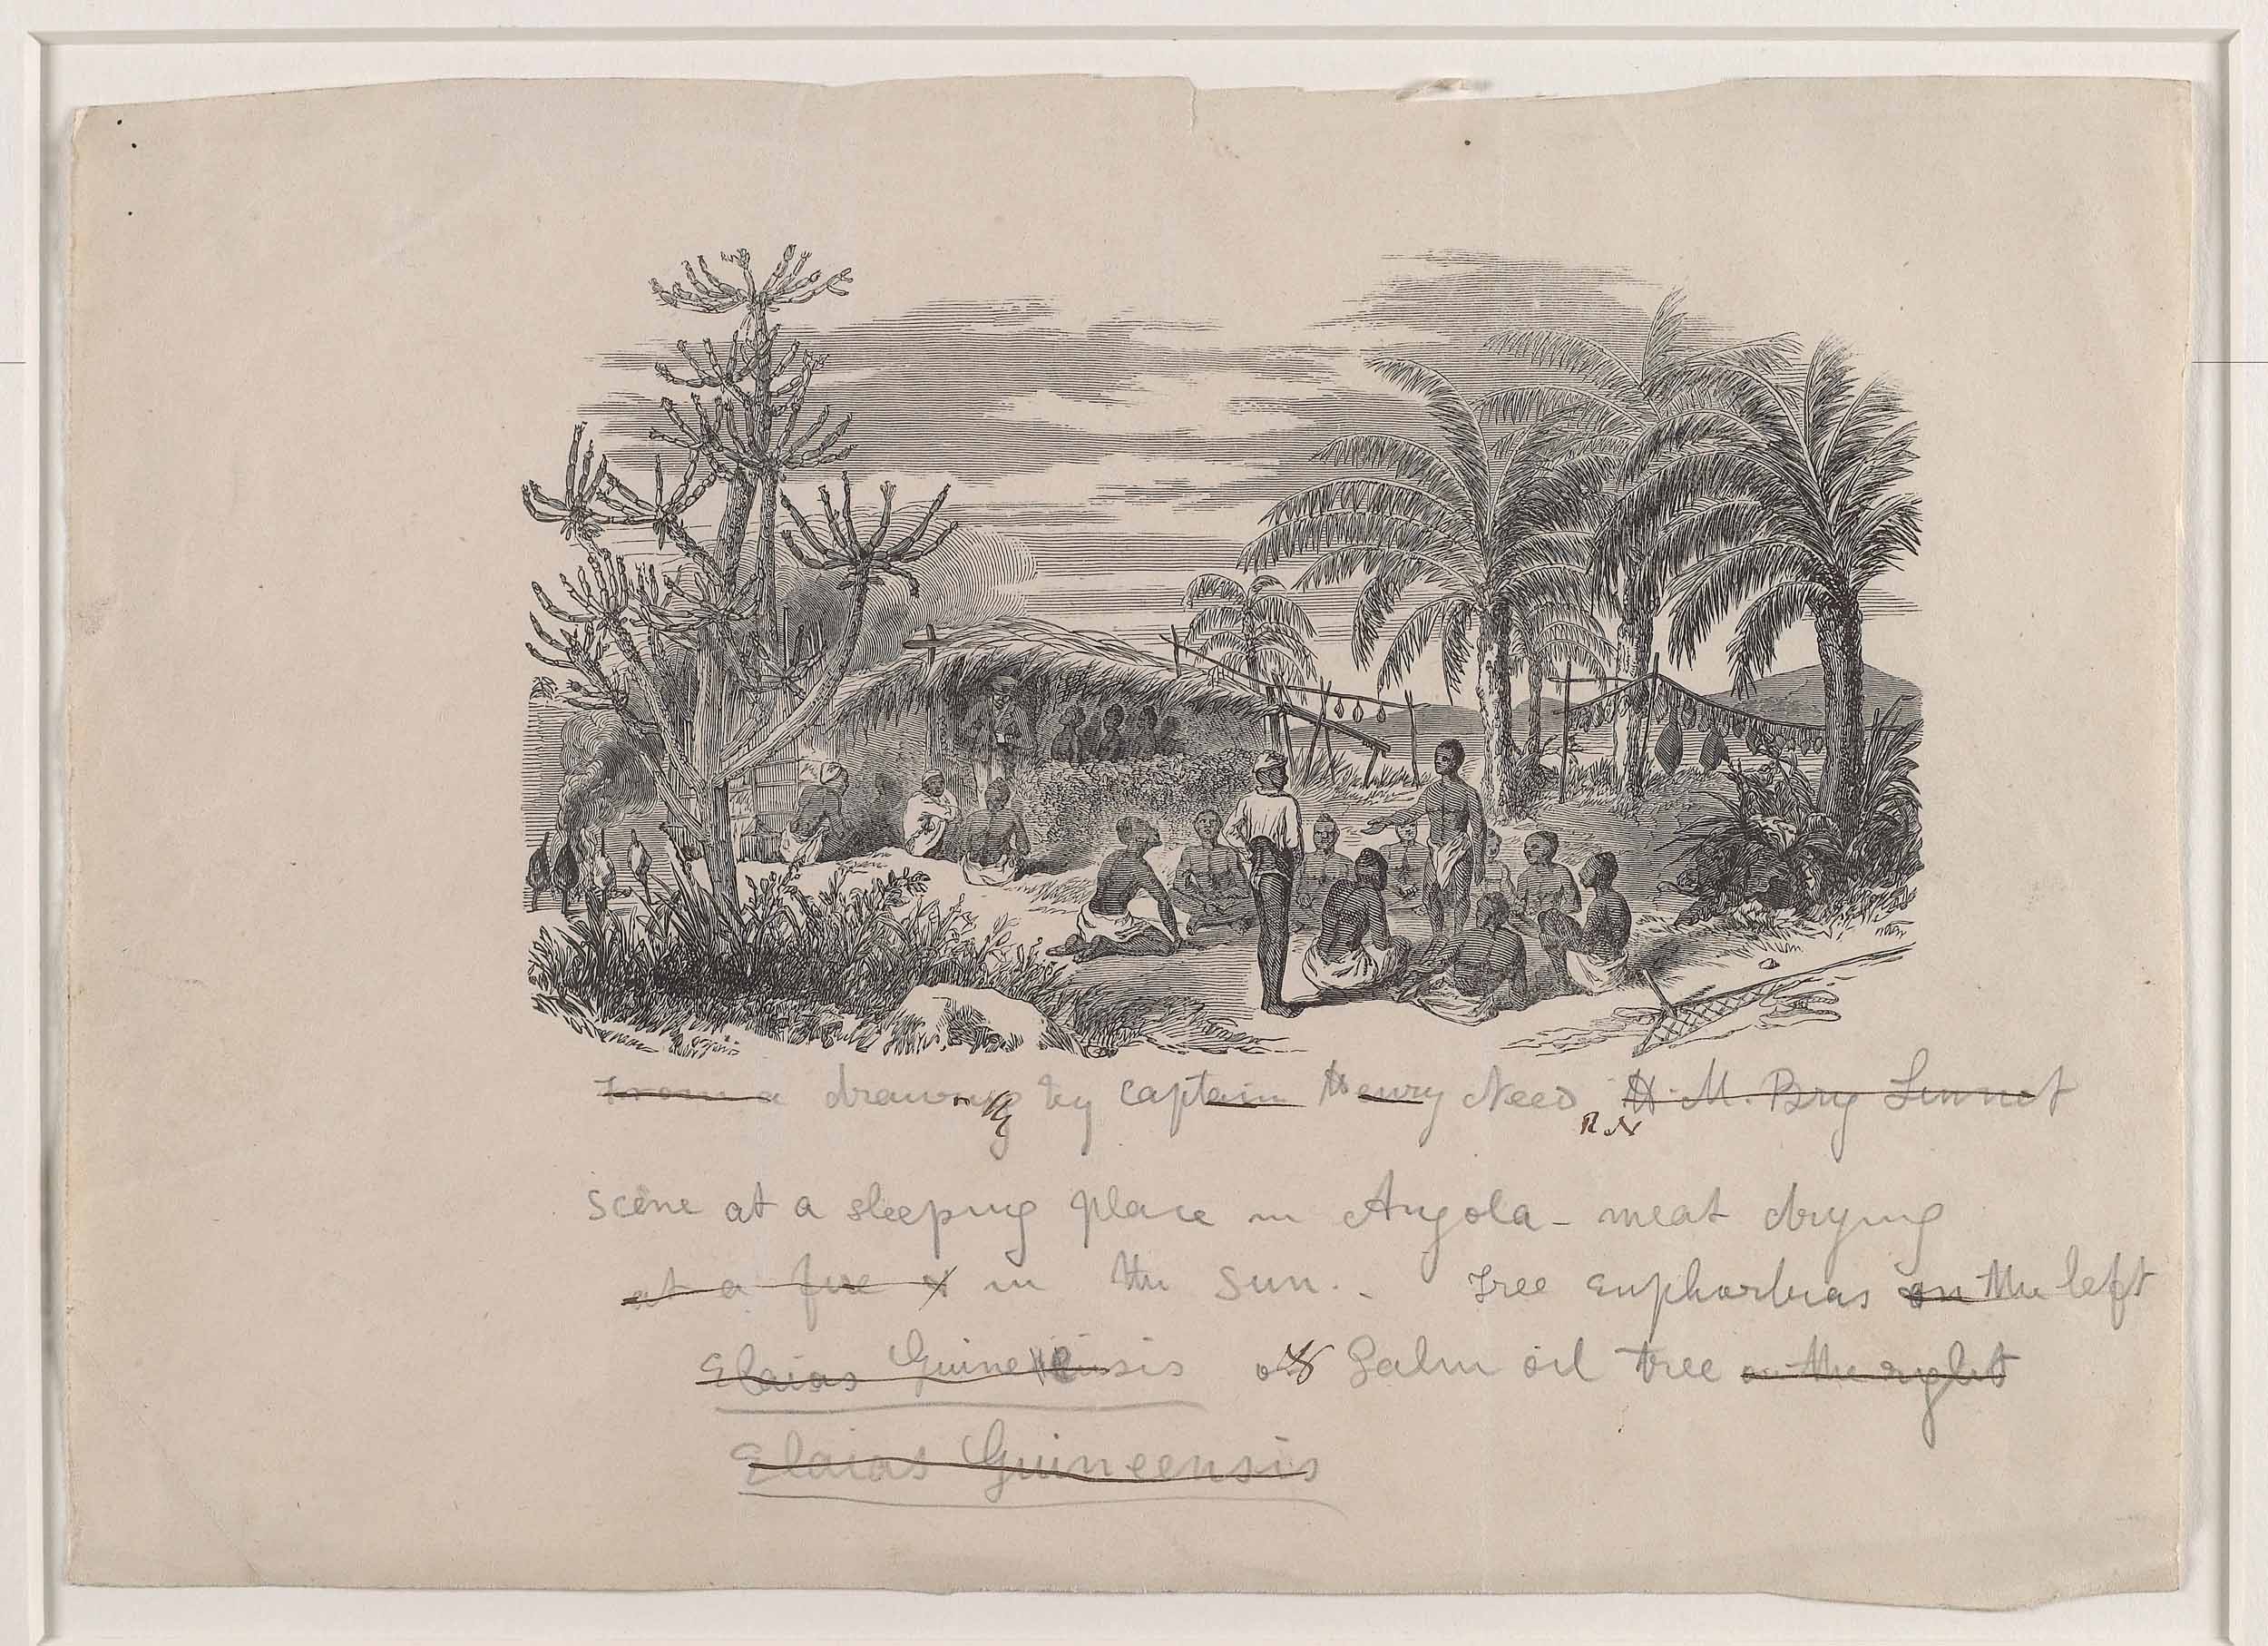 David Livingstone, Scene at a sleeping-place in Angola (Annotated Proof), c.1856-1857. Copyright National Library of Scotland. Creative Commons Share-alike 2.5 UK: Scotland(https://creativecommons.org/licenses/by-nc-sa/2.5/scotland/).